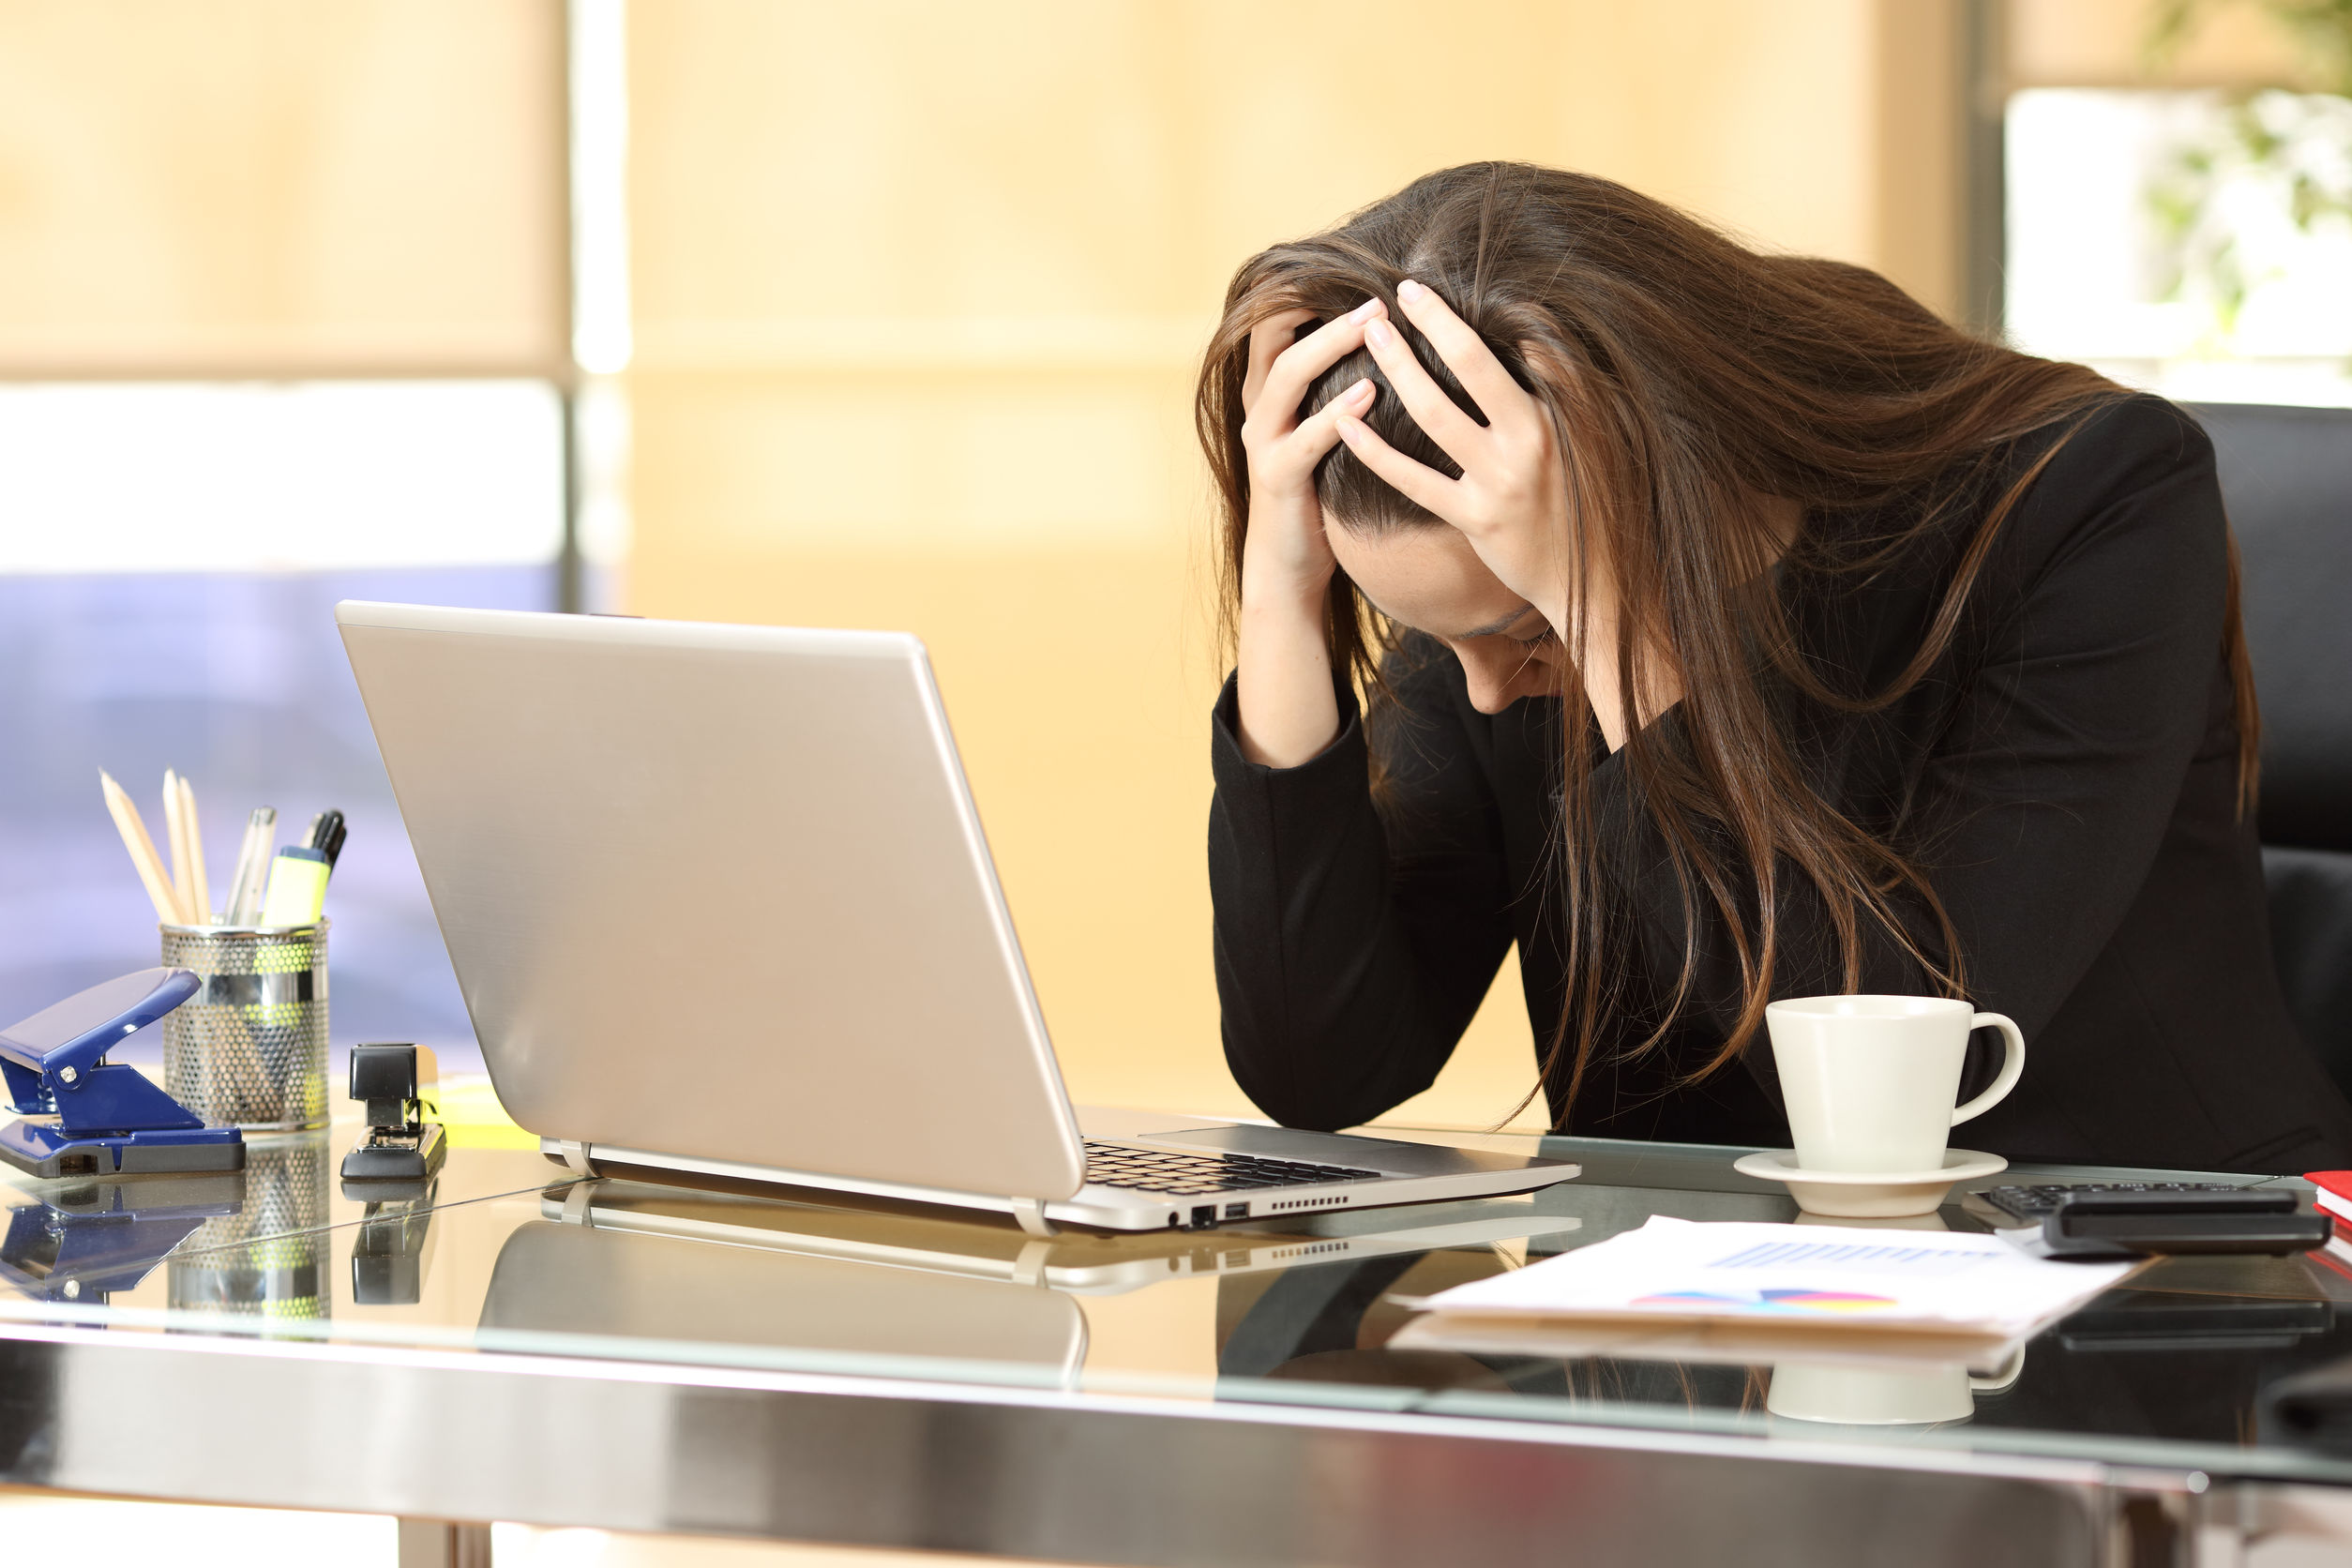 Article image for WHO recognises burnout as a medical condition, psychologist says it’s ‘a very real problem’